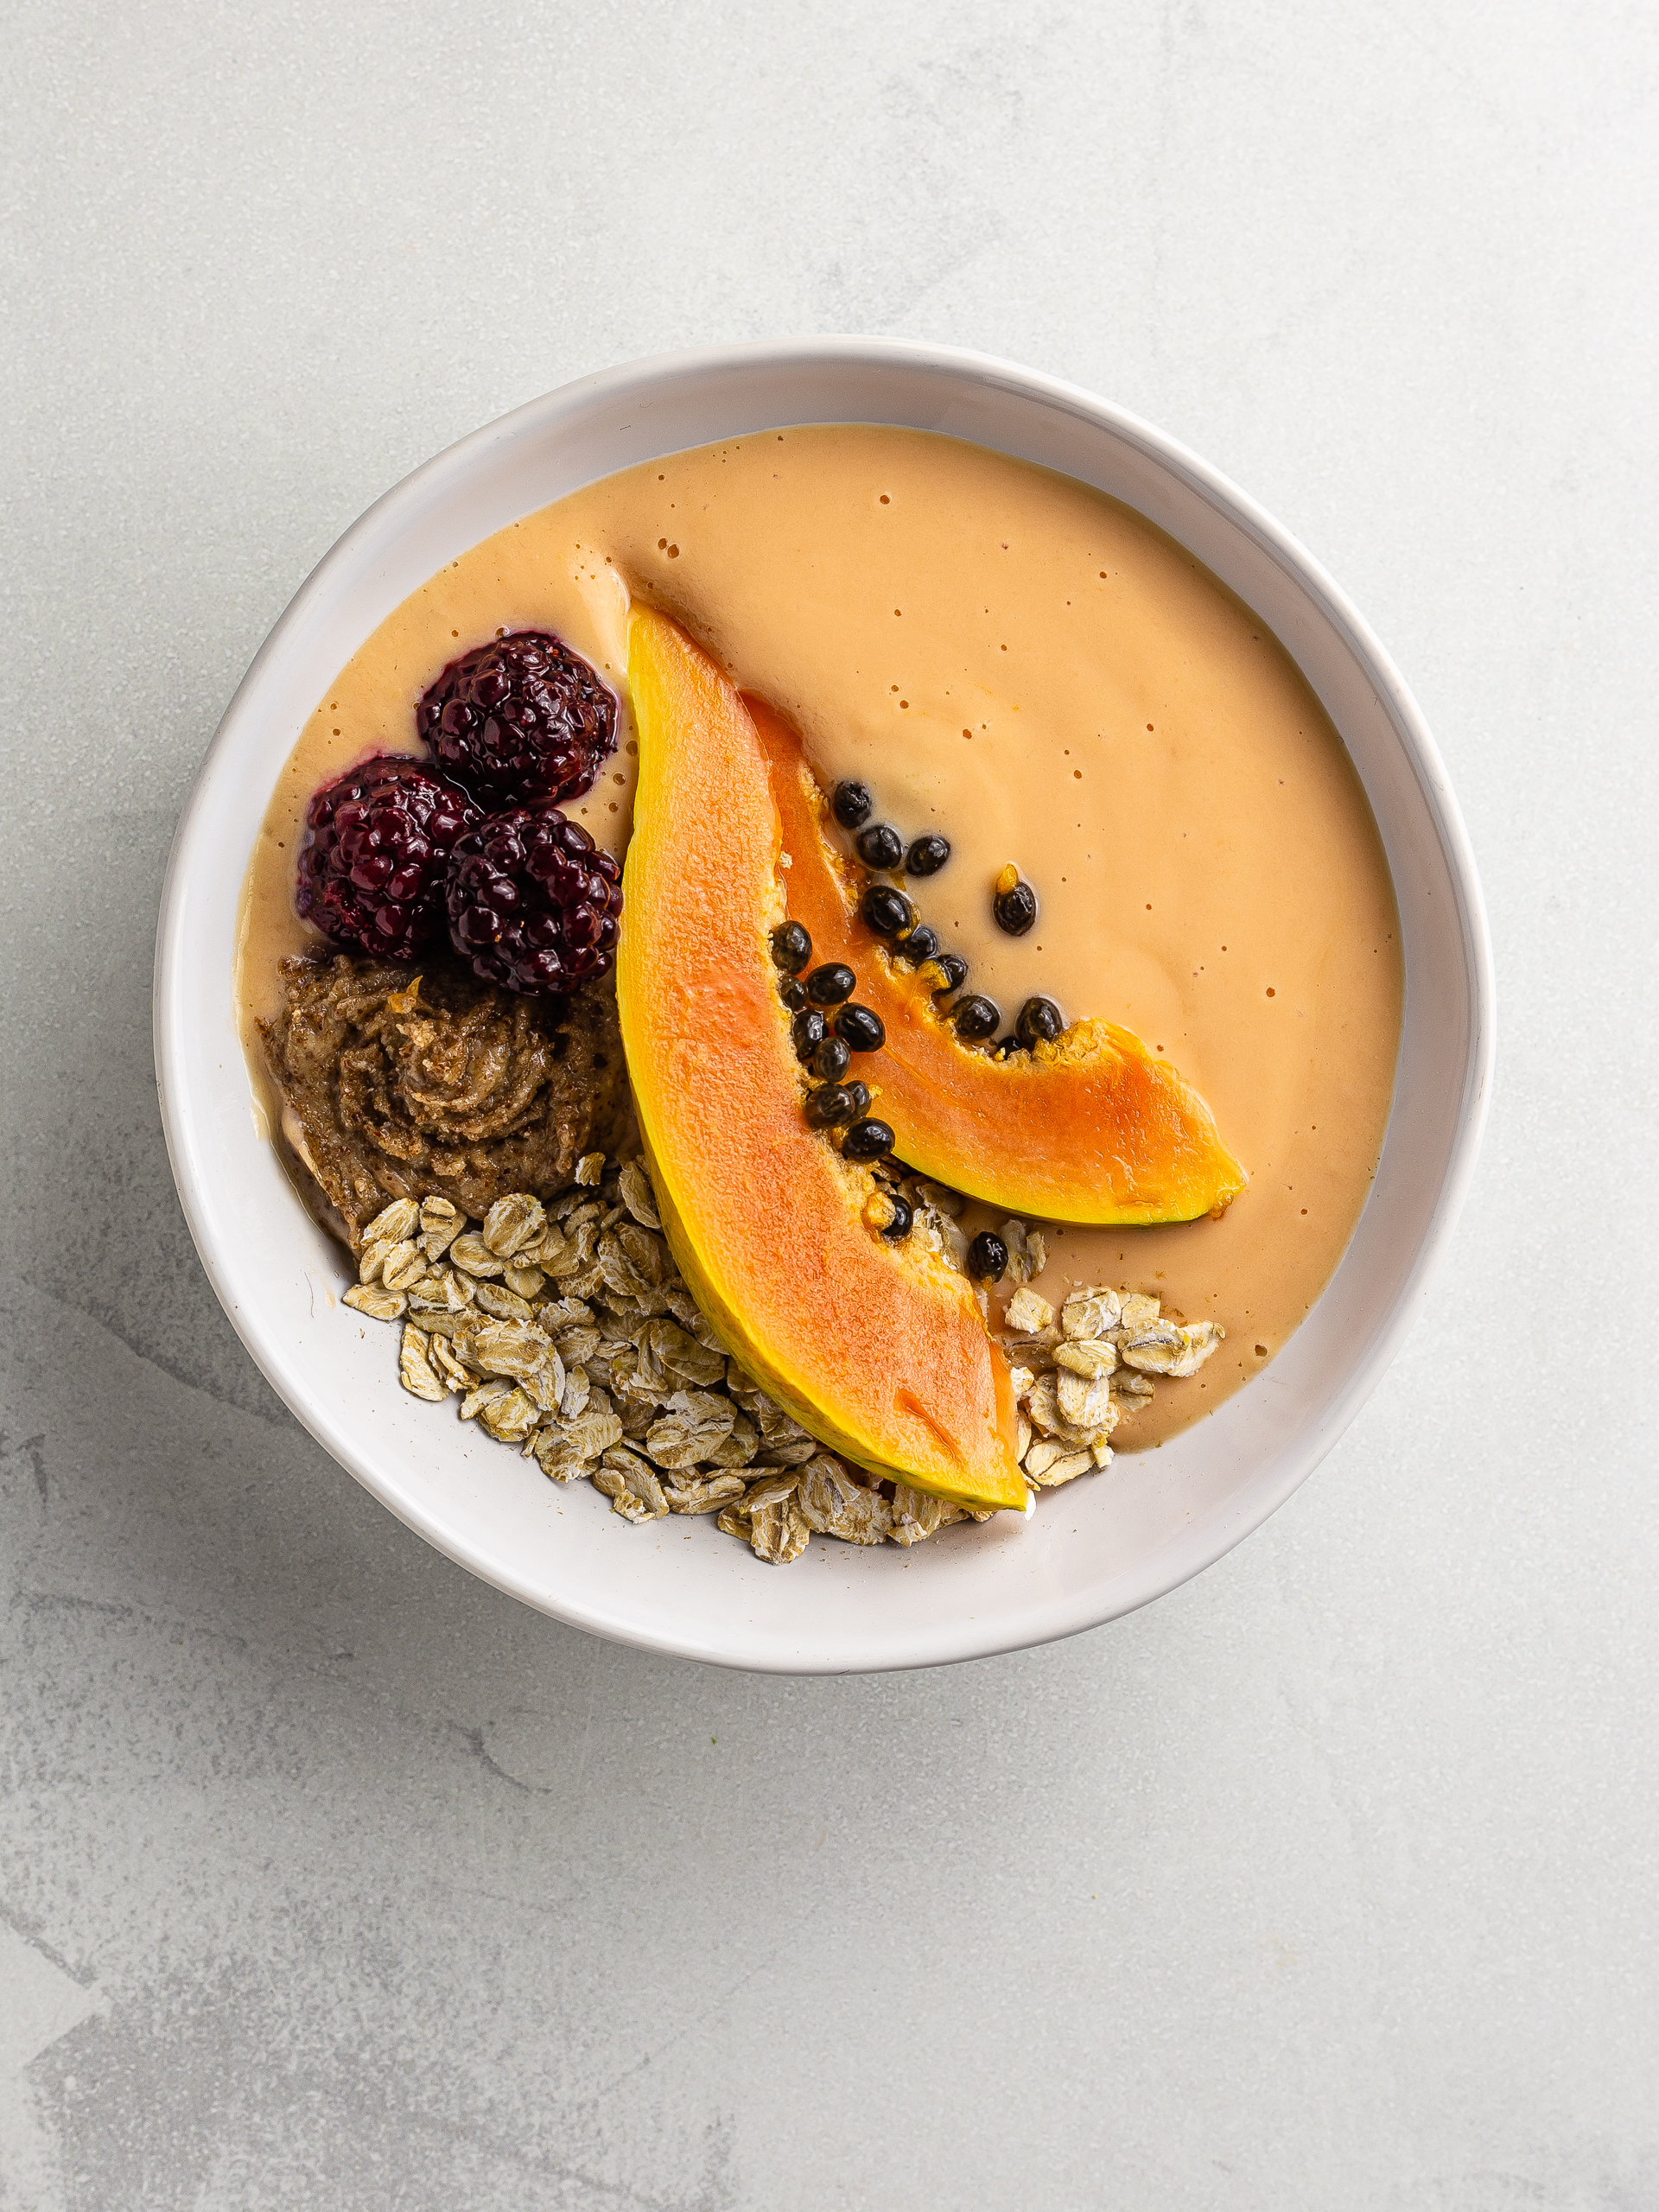 papaya smoothie bowl with oats and blackberries